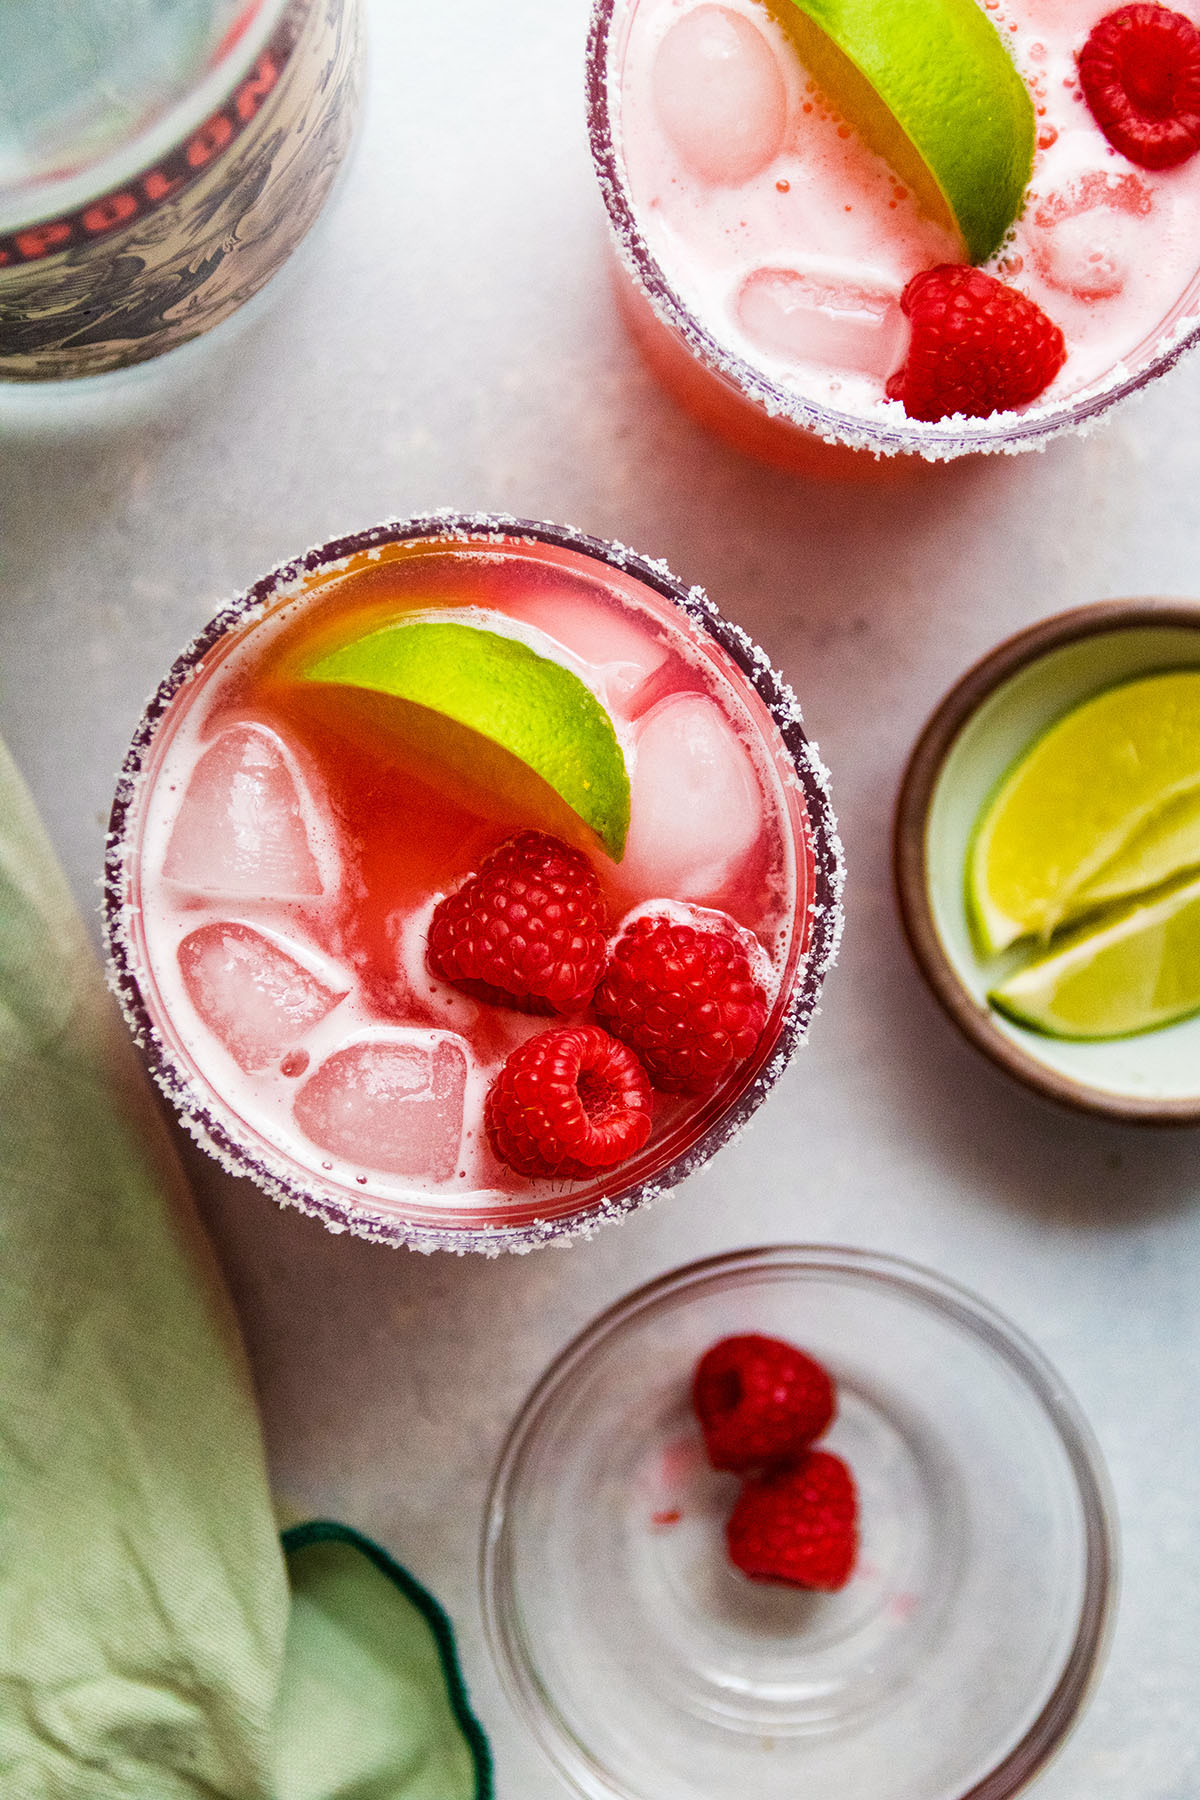 Overhead view of two margaritas next to a bowl of fresh raspberries and a bowl of lime wedges.